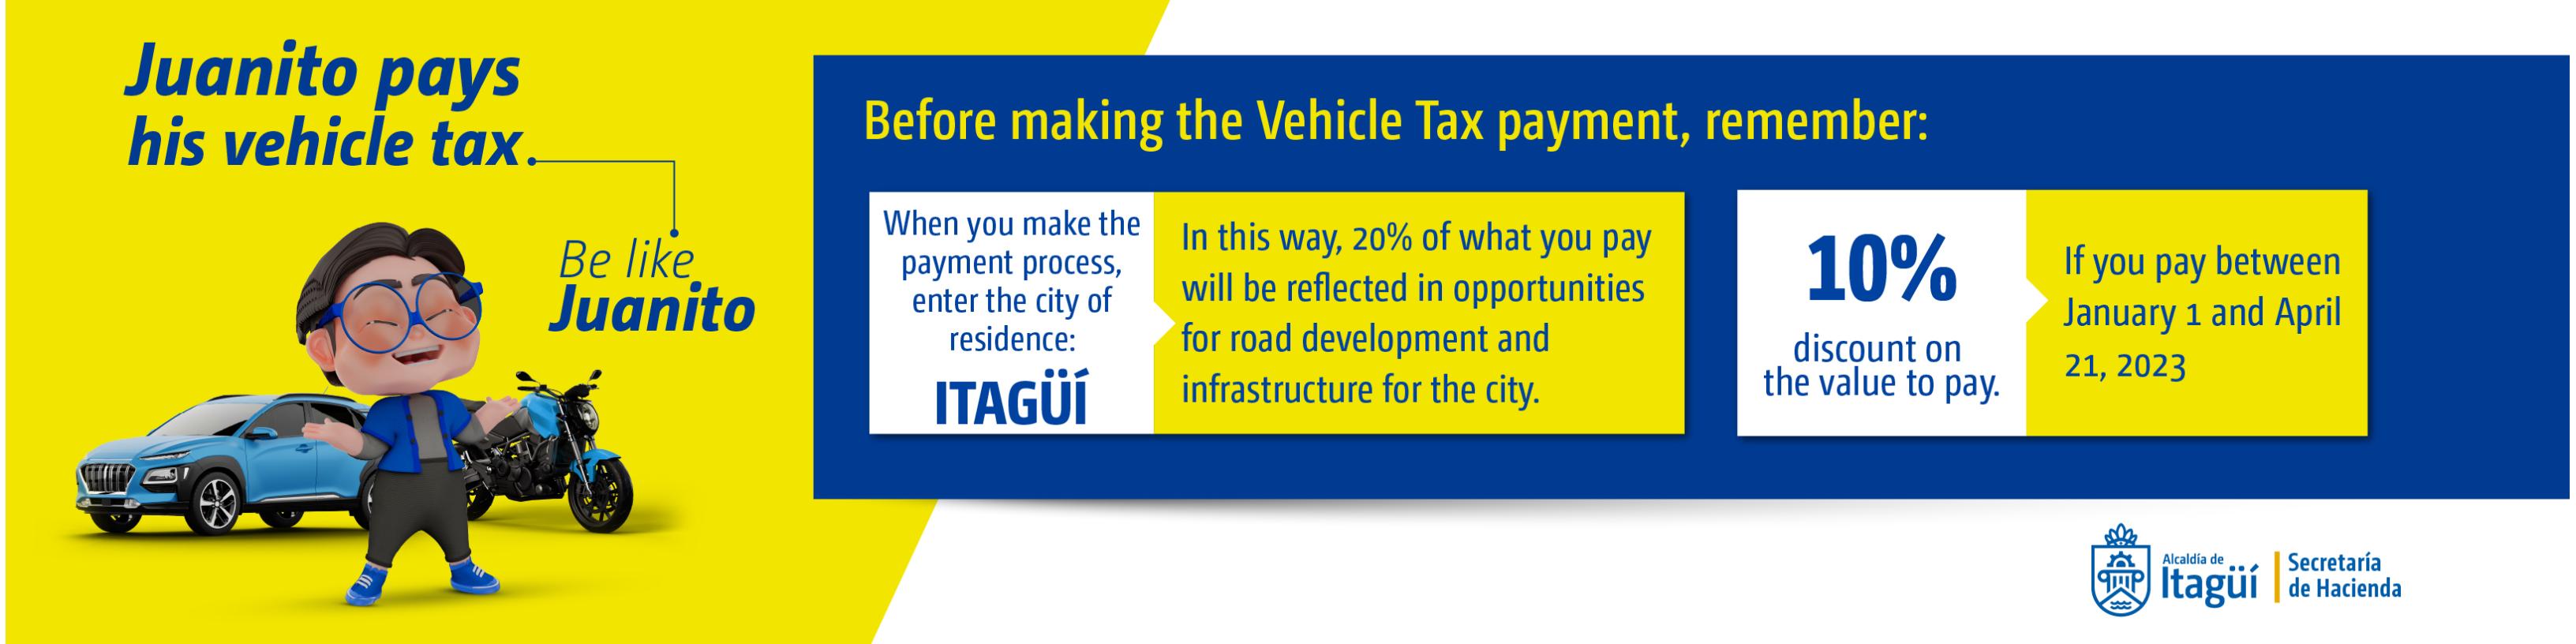 Juanito pays his vehicle tax. Remember that until April 21 you will have a 10% discount on the value to pay.
If you put Itagüí in the city of residence, 20% of what you pay will be reflected in development opportunities for our city